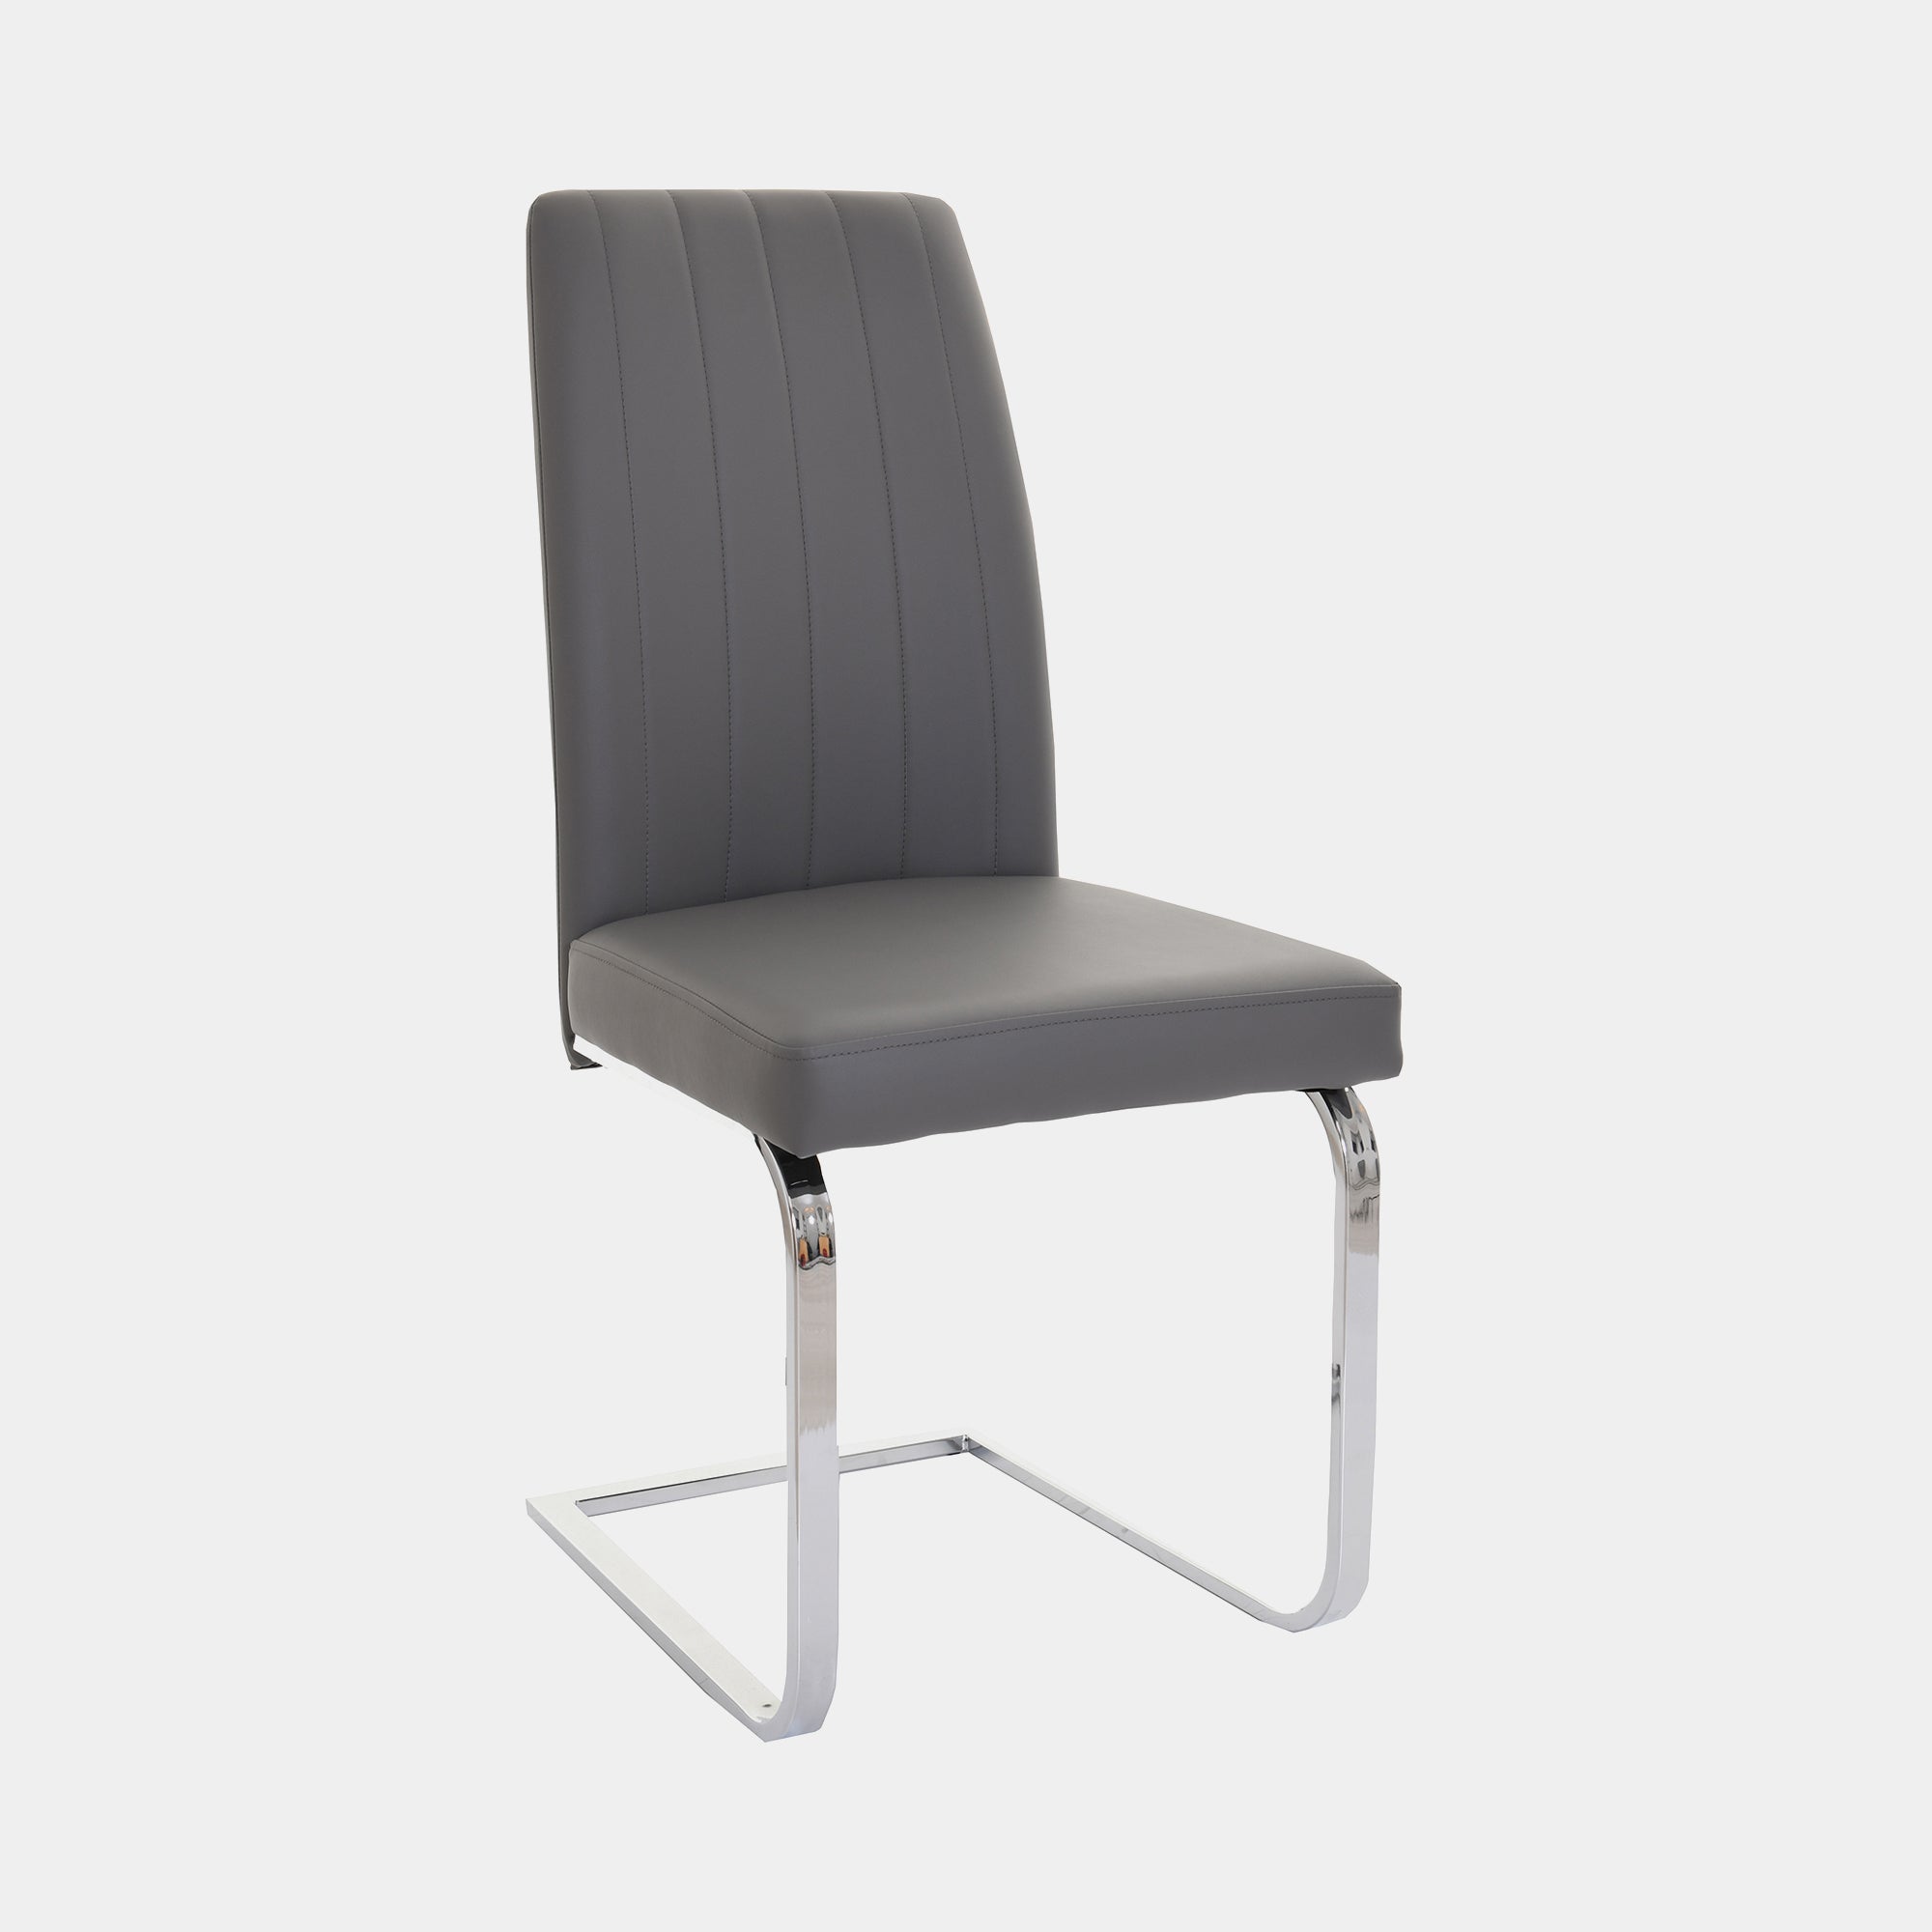 Prato - Cantilever Dining Chair In Dark Grey PU With A Chrome Finished Frame